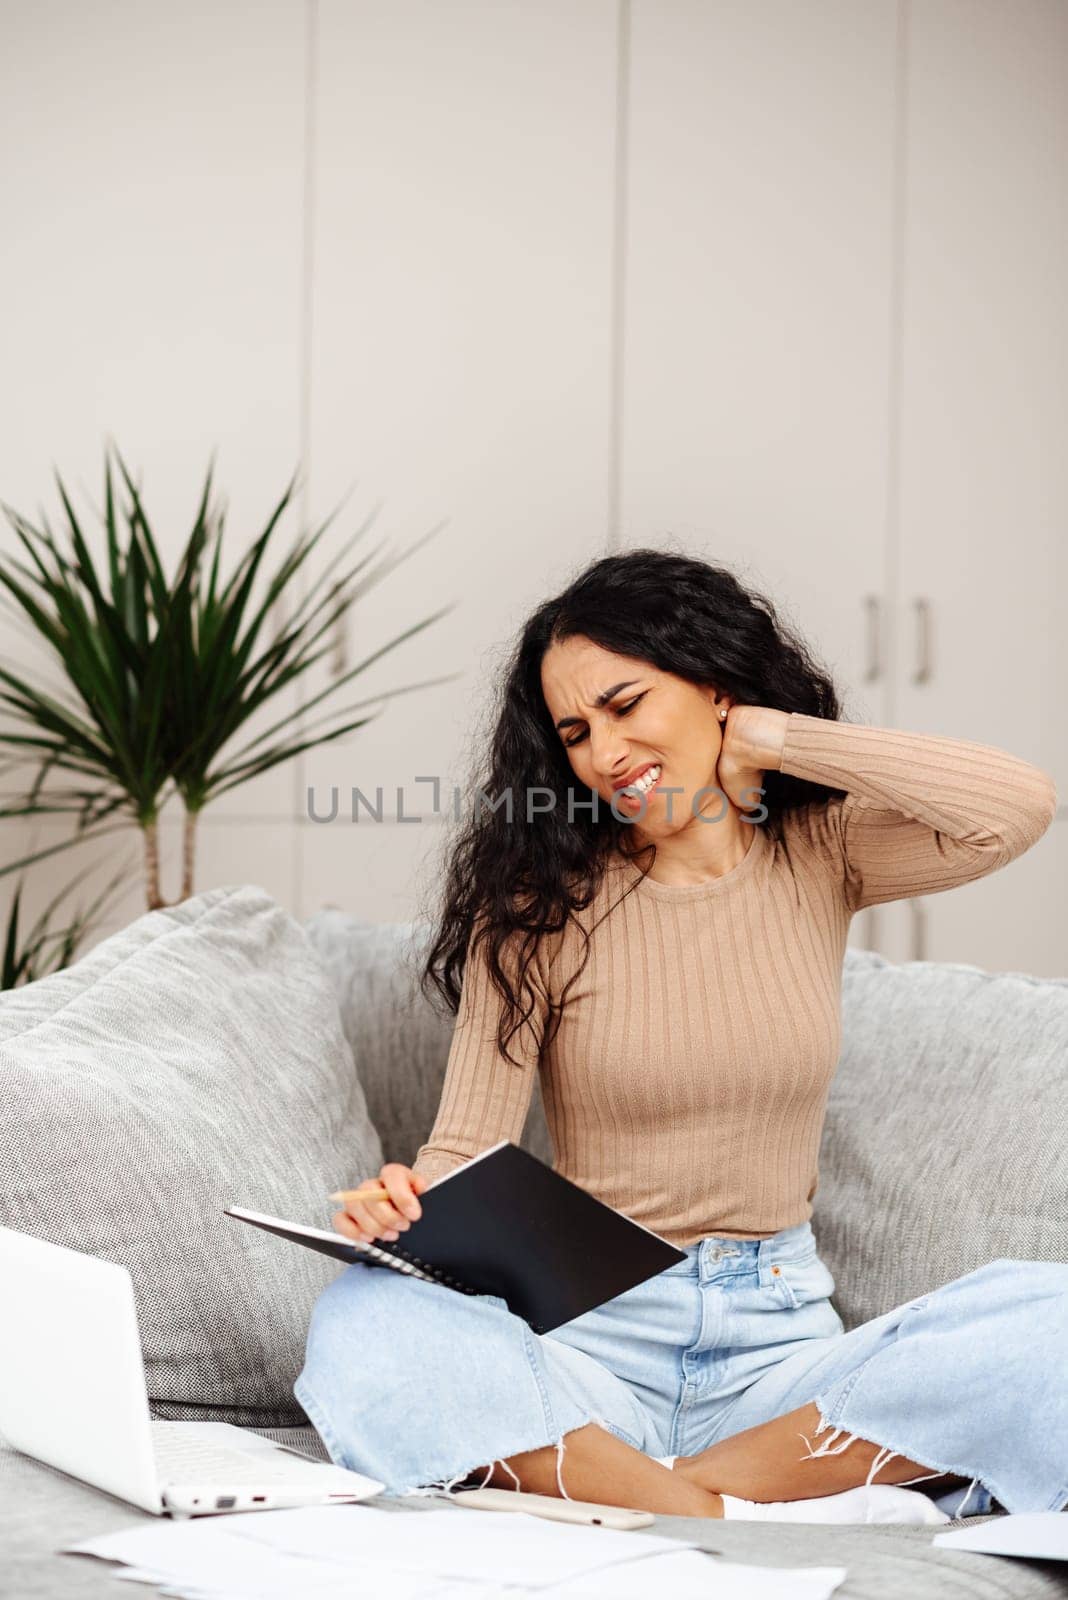 Frowning Arab woman sitting on the sofa near the computer, break, touching the neck, suffering from soreness, pain caused by poor bad posture, sedentary work, sedentary work, sitting at the laptop for a long period of concept image